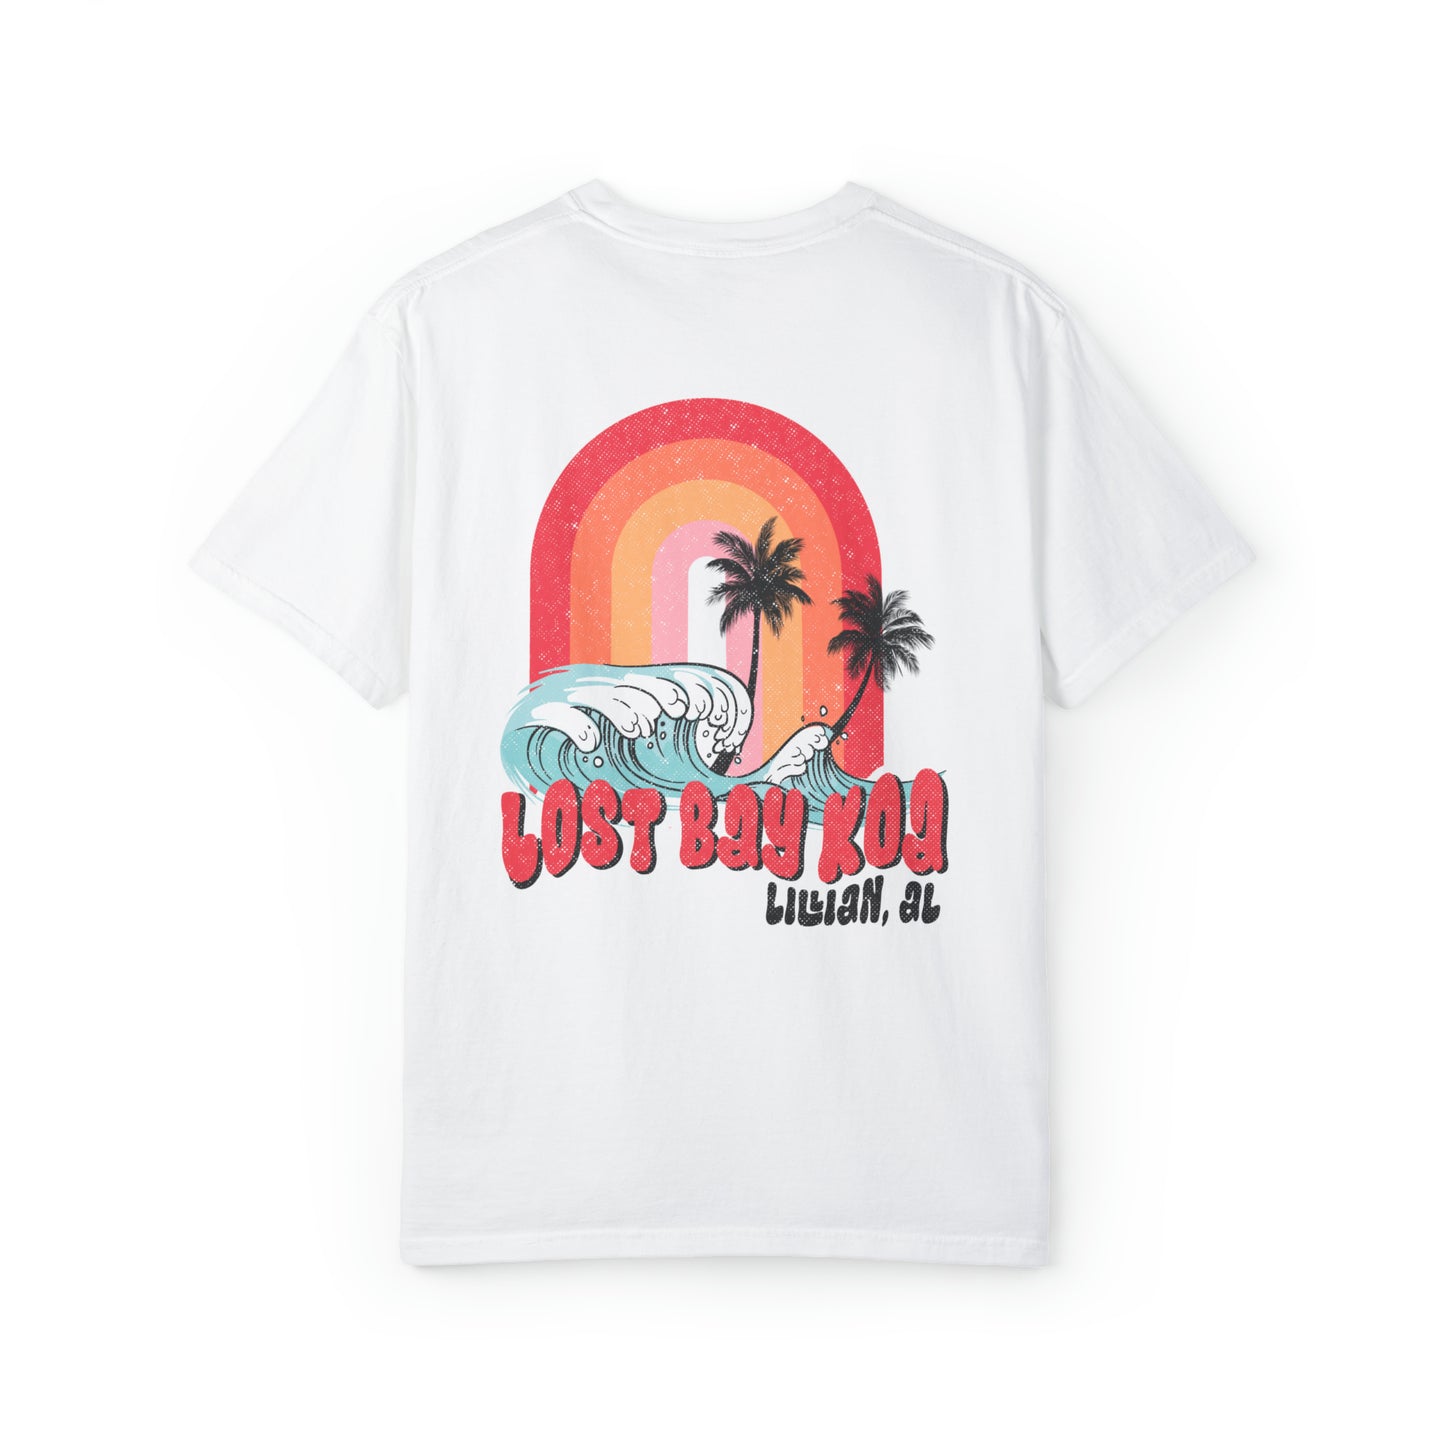 Lost Bay Wave 2- Unisex Garment-Dyed T-shirt